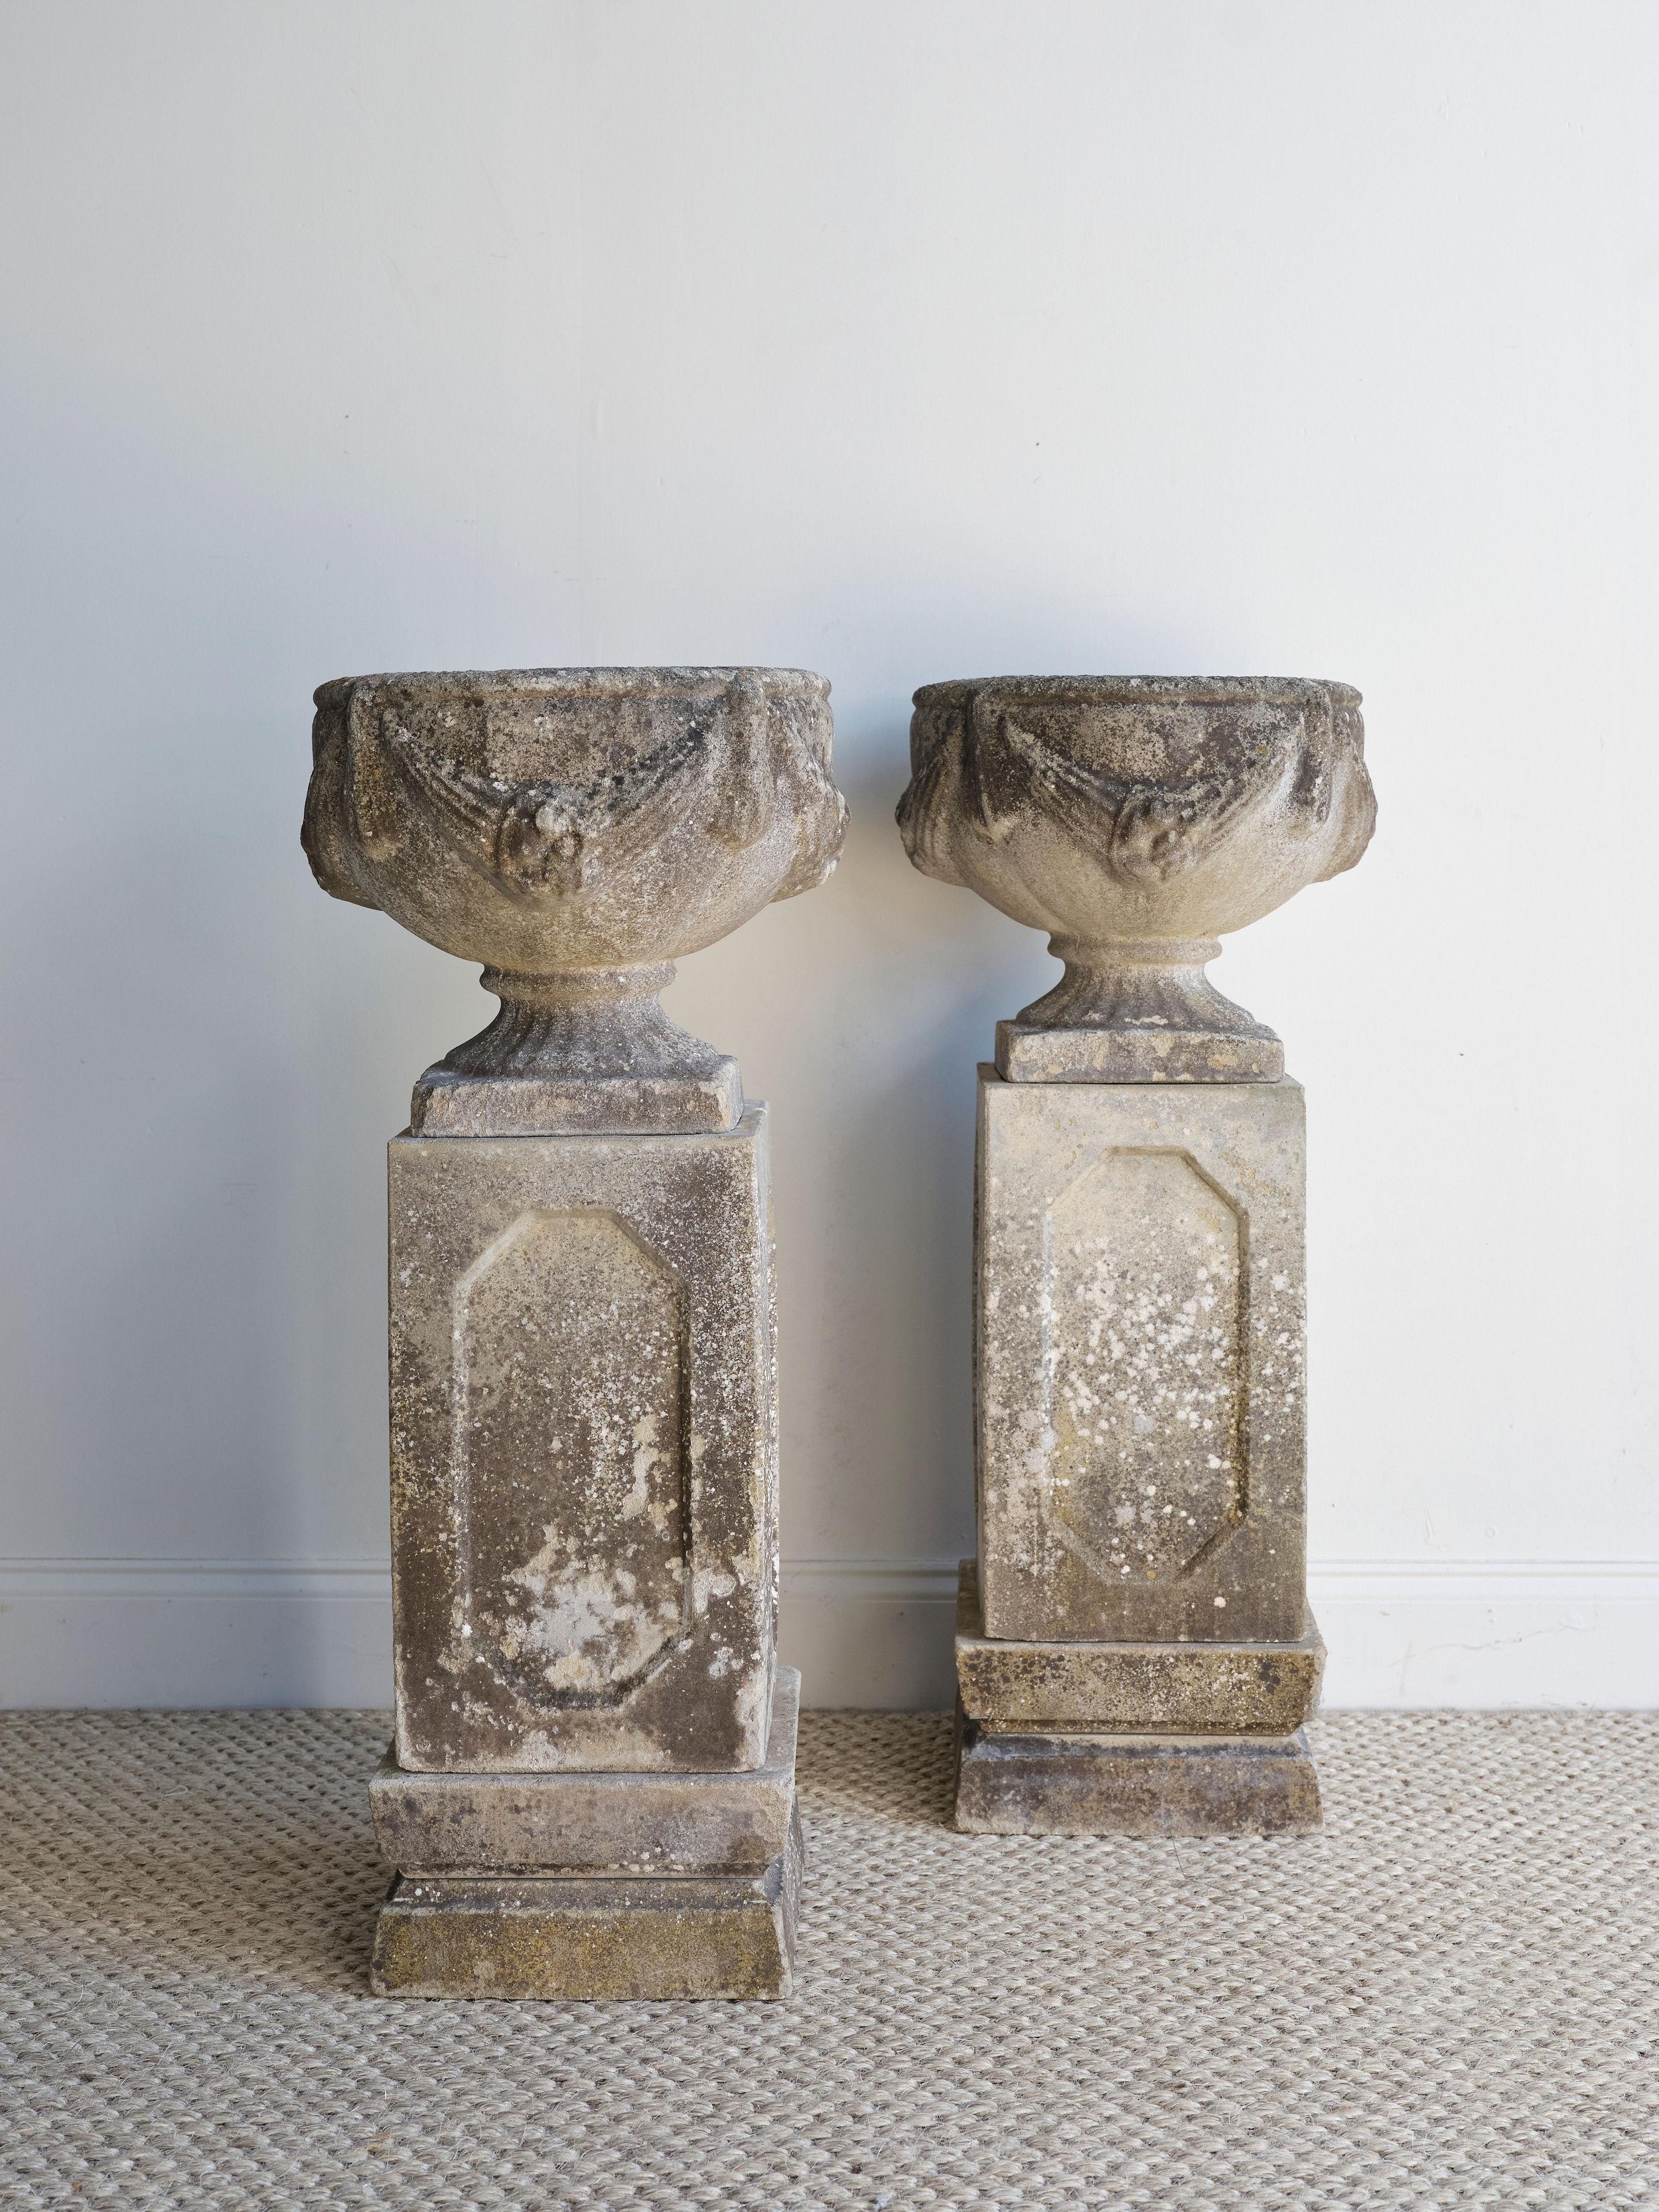 These beautiful concrete swag urns were created in 19th century England. They are extremely heavy and each urn comes with 4 pieces total. So for the pair, the total number of pieces would be 8. The concrete is weathered, but still in great condition.